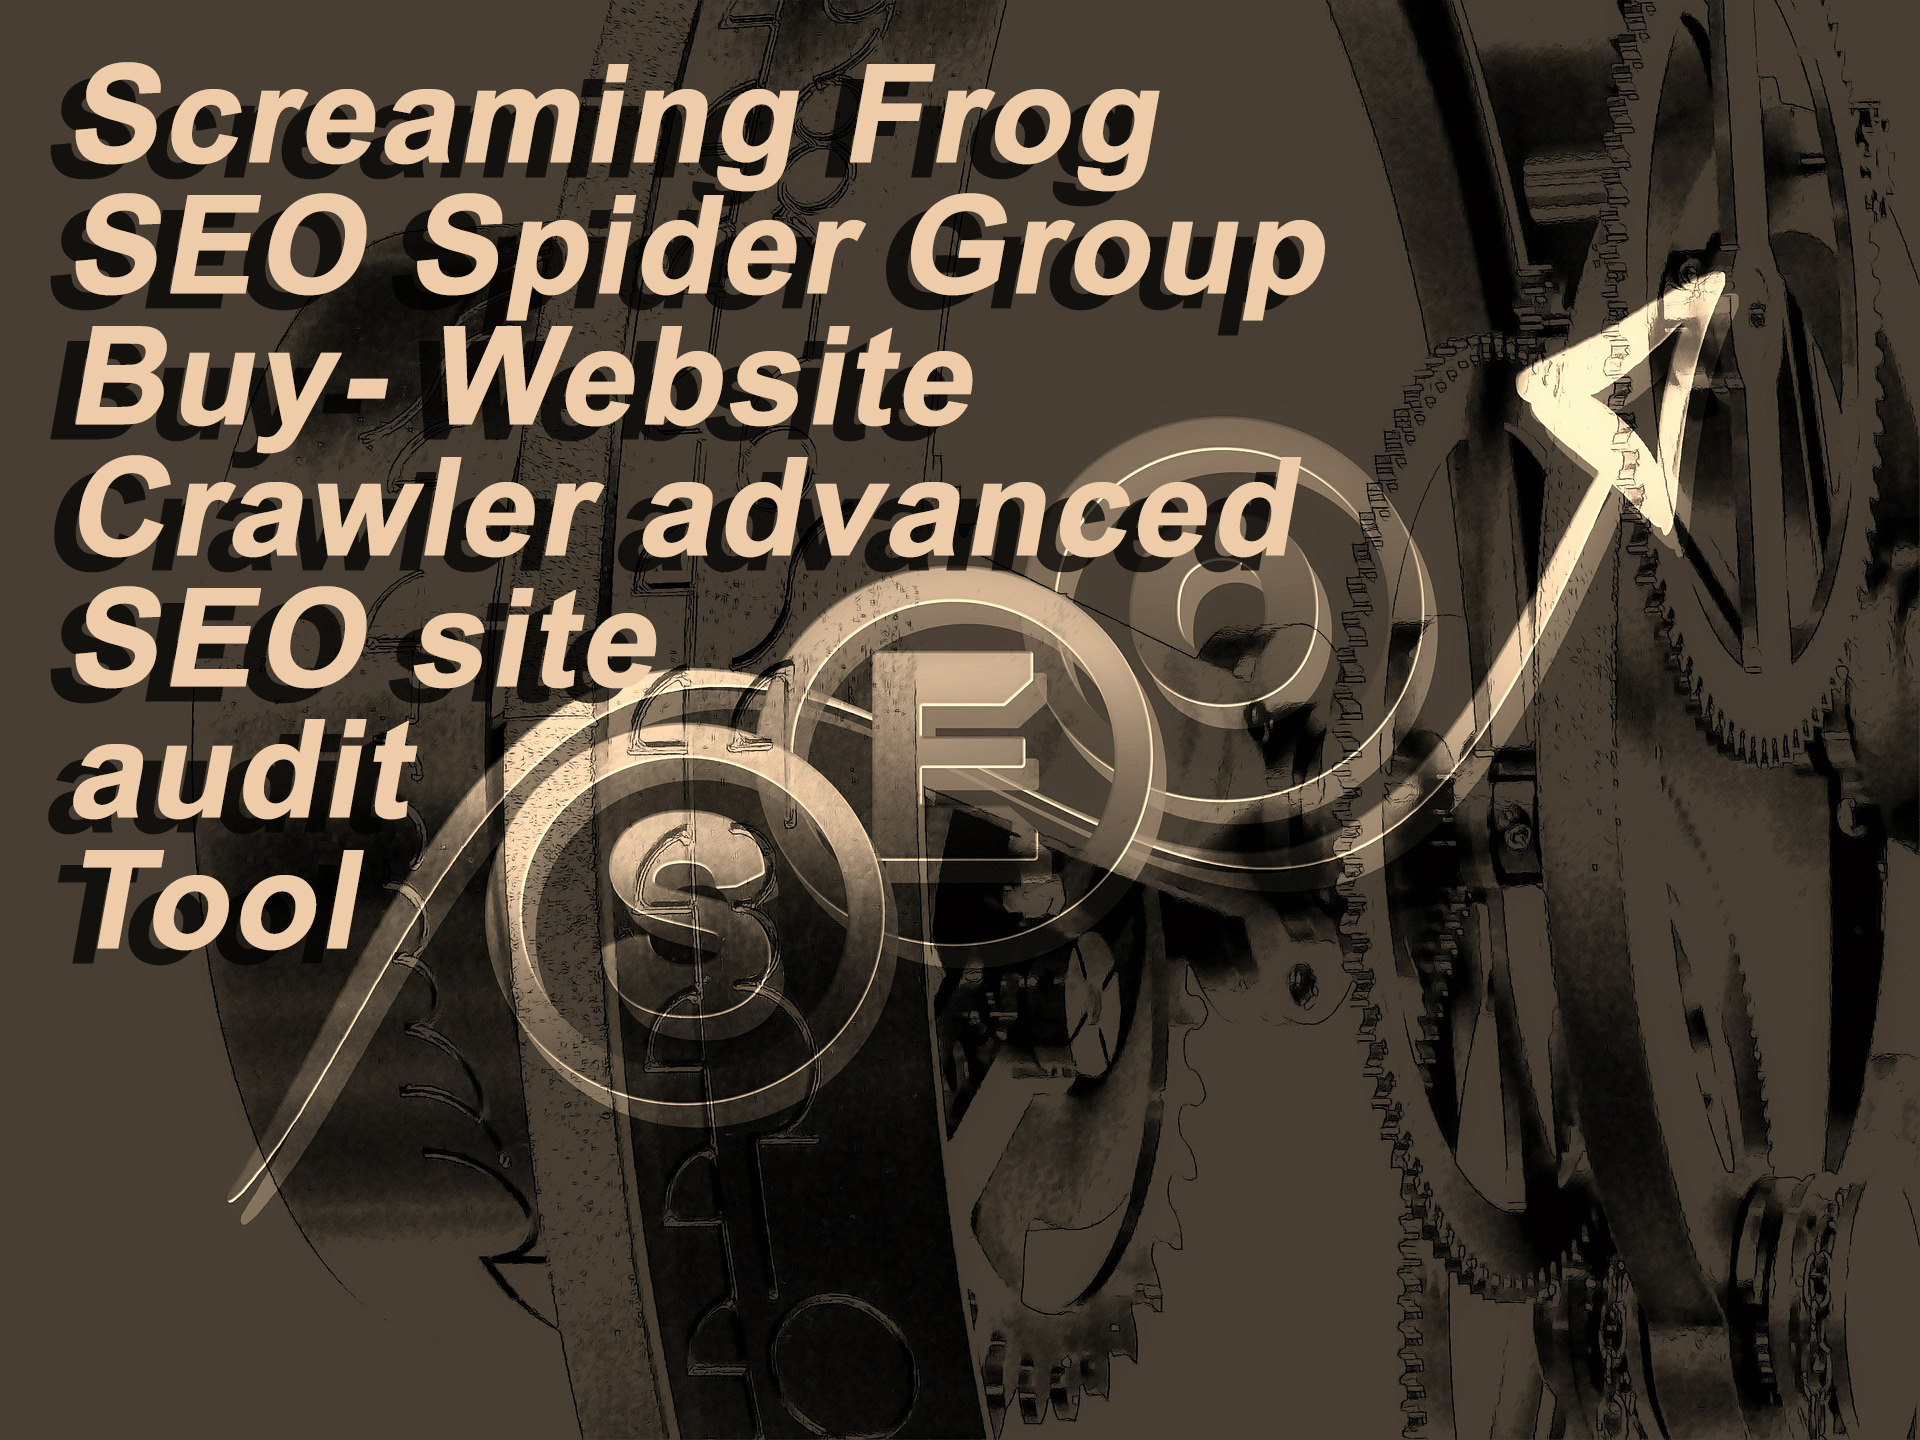 Screaming Frog SEO Spider 19.3 instal the last version for iphone